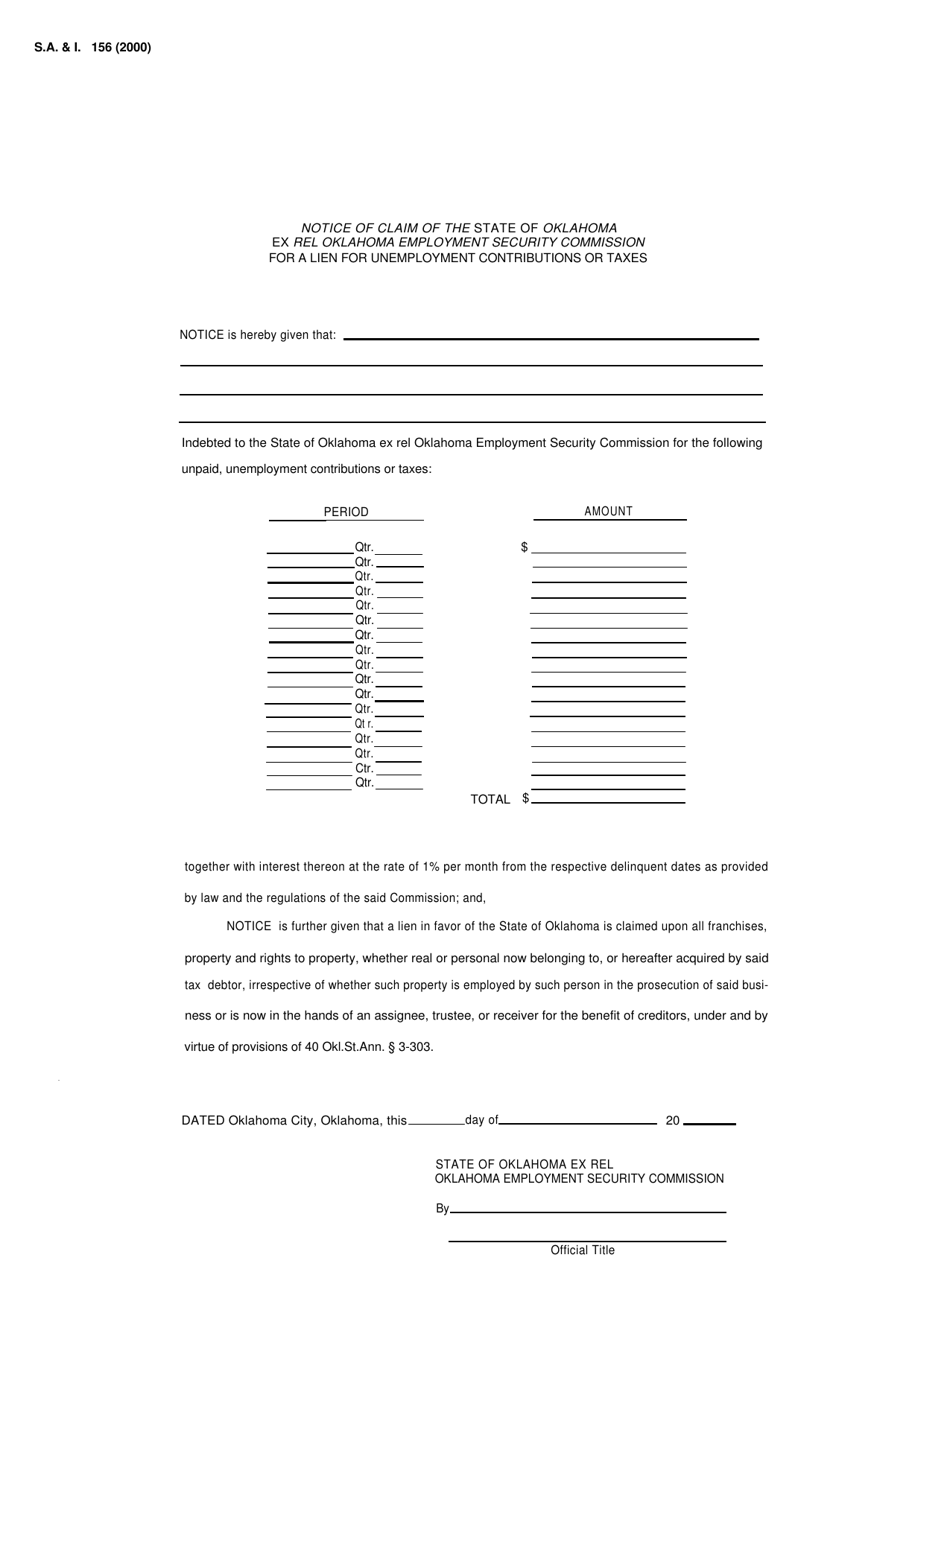 Form S.A. I.156 Notice of Claim of the State of Oklahoma for a Lien for Unemployment Contributions or Taxes - Oklahoma, Page 1